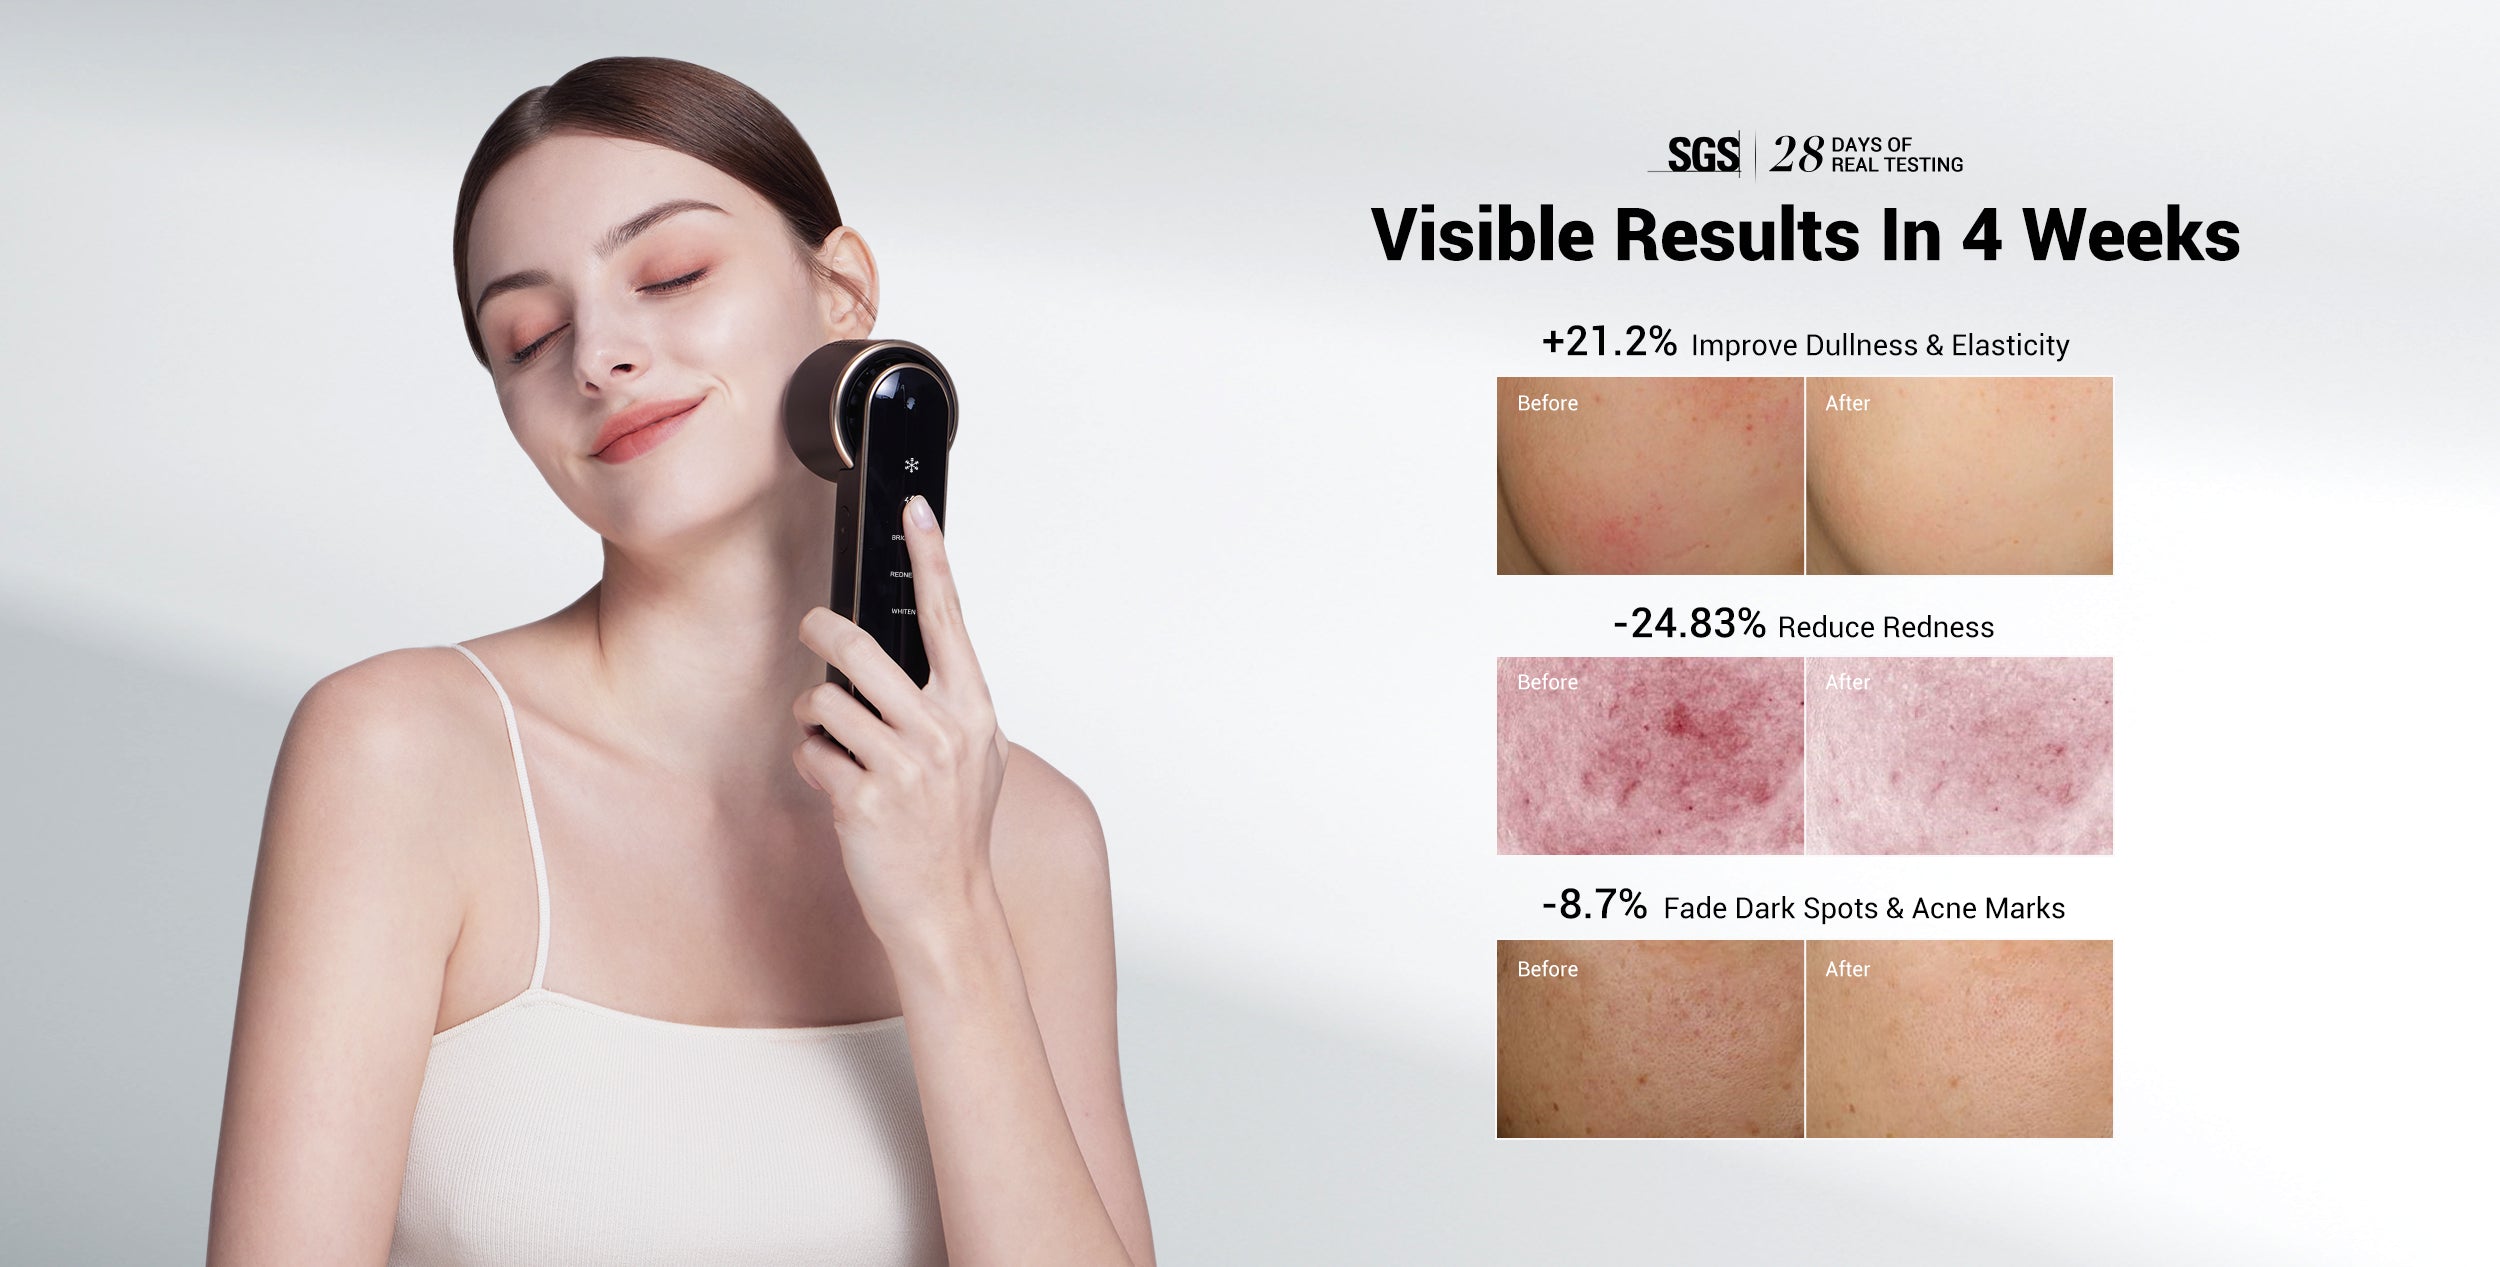 After 4 weeks of using the JOVS Blacken DPL Photofacial device, the complexion was brighter, skin elasticity was improved and redness was reduced.